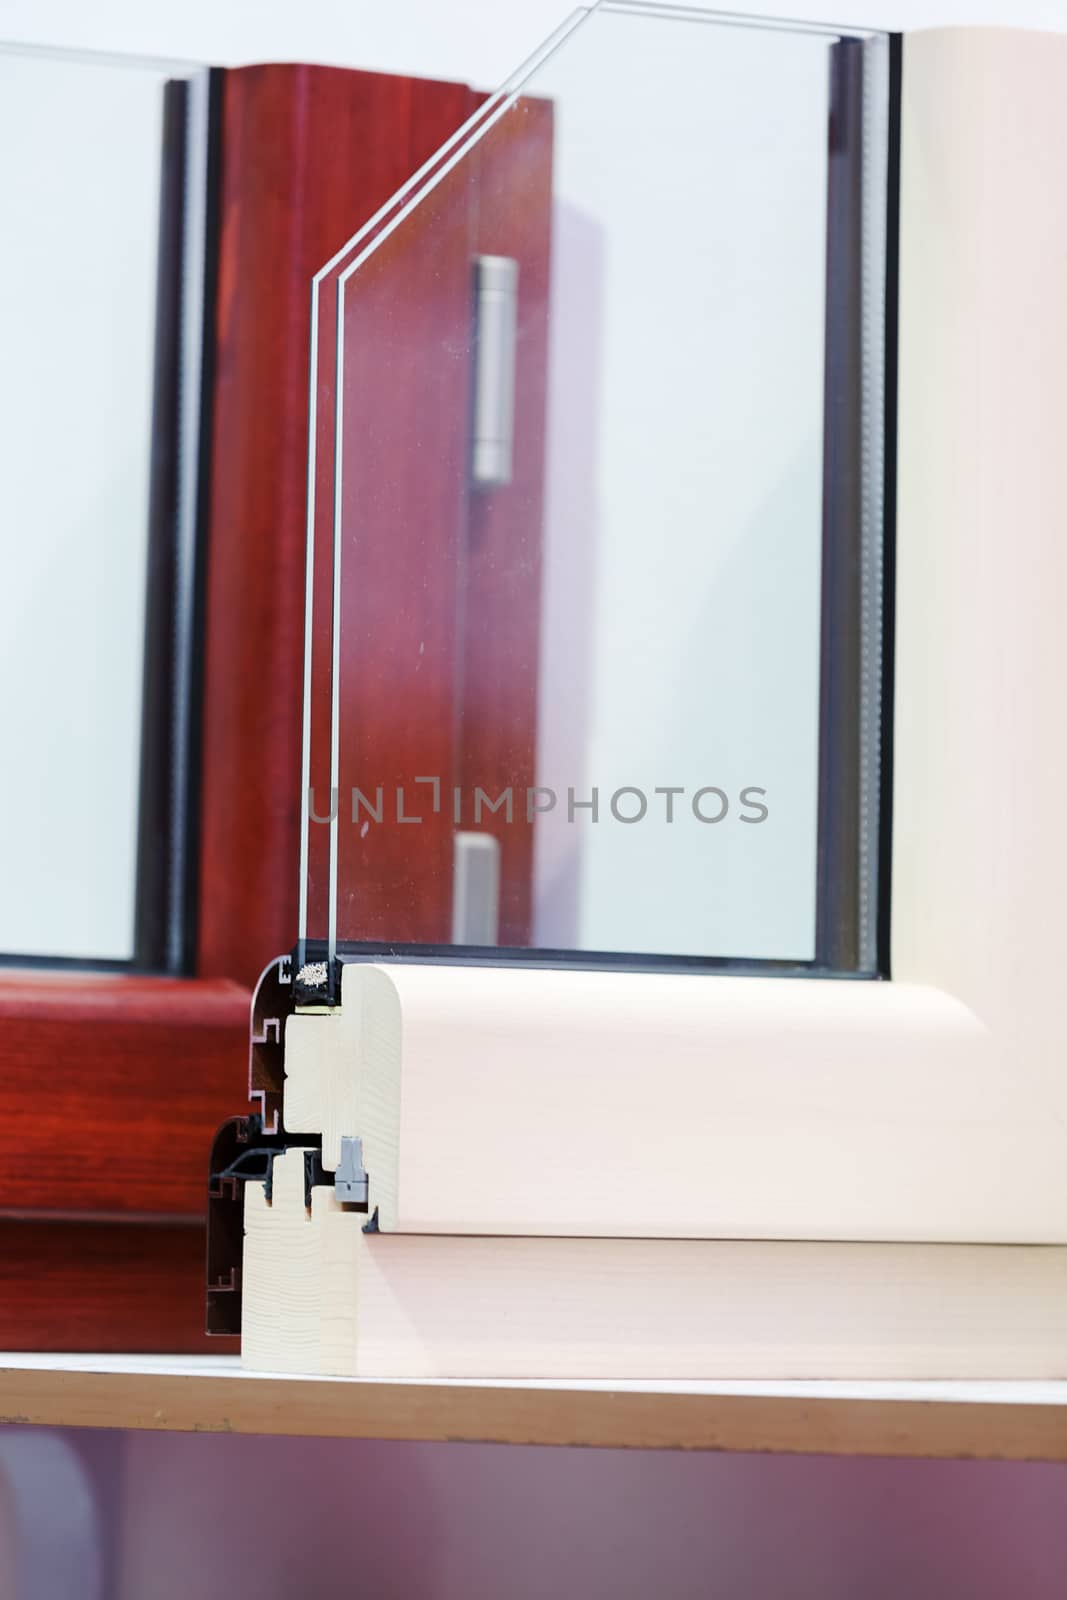 part of the window frames with glass, note shallow depth of field